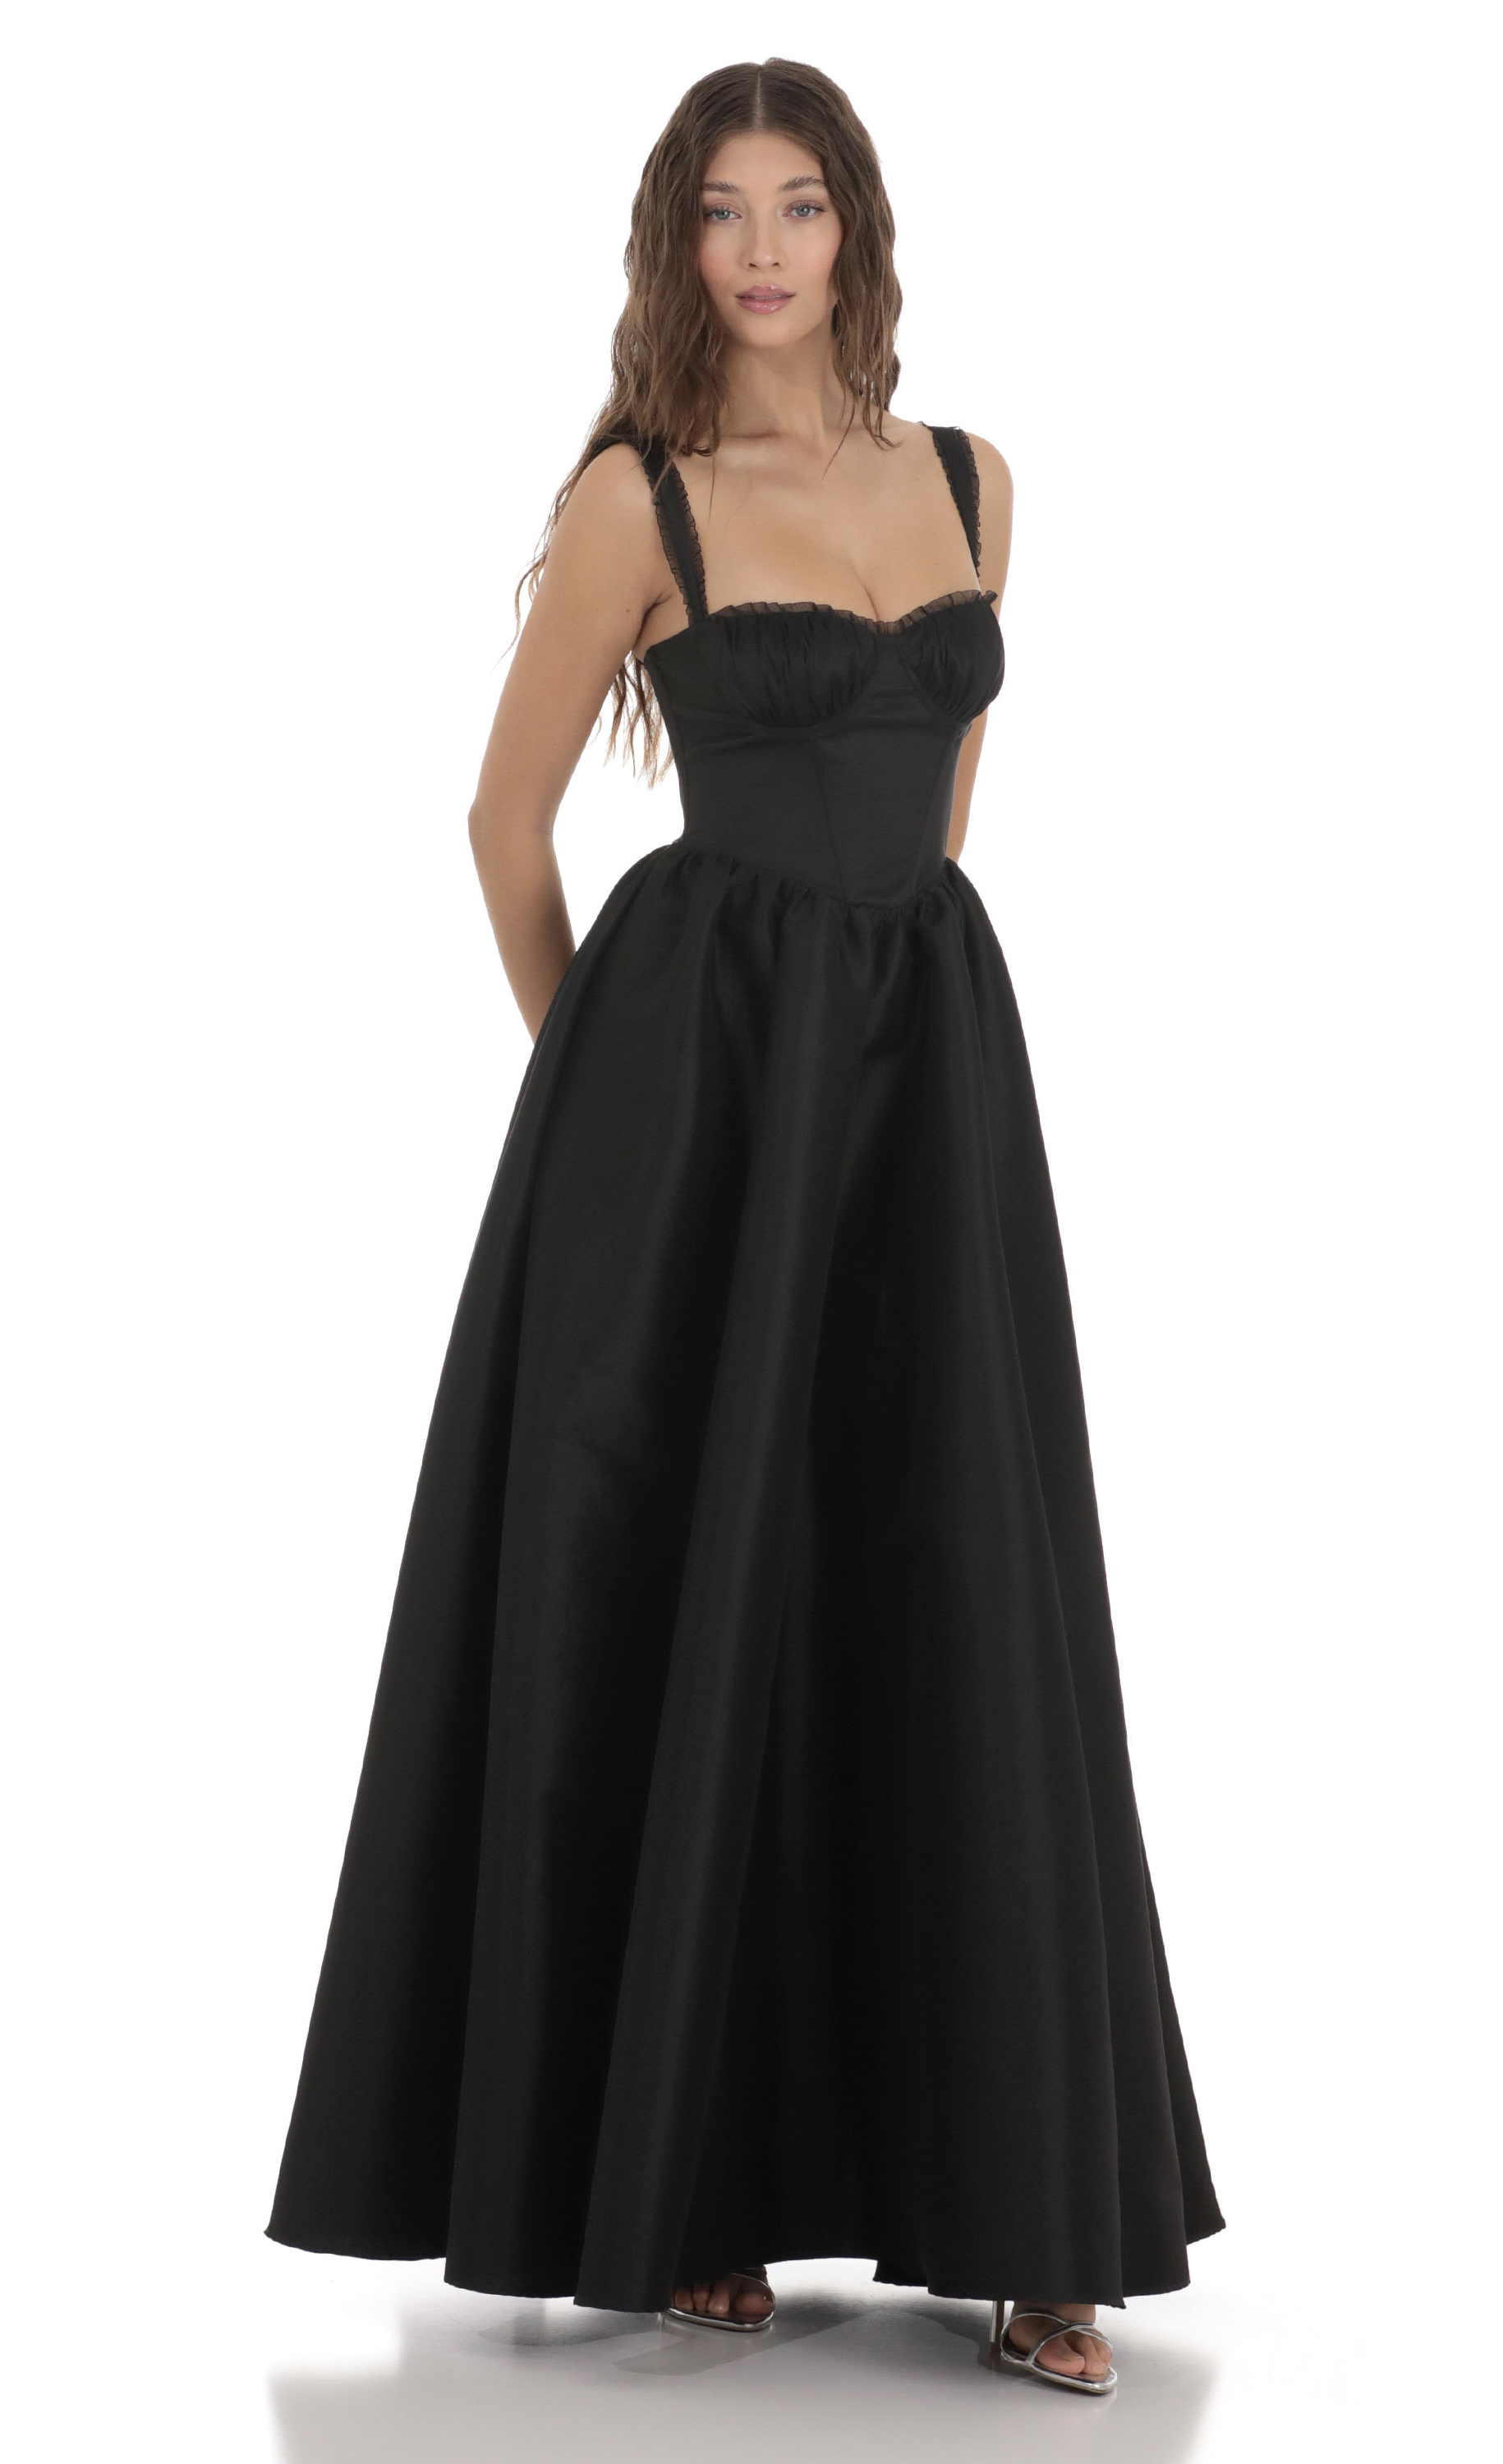 Corset Gown Dress in Black